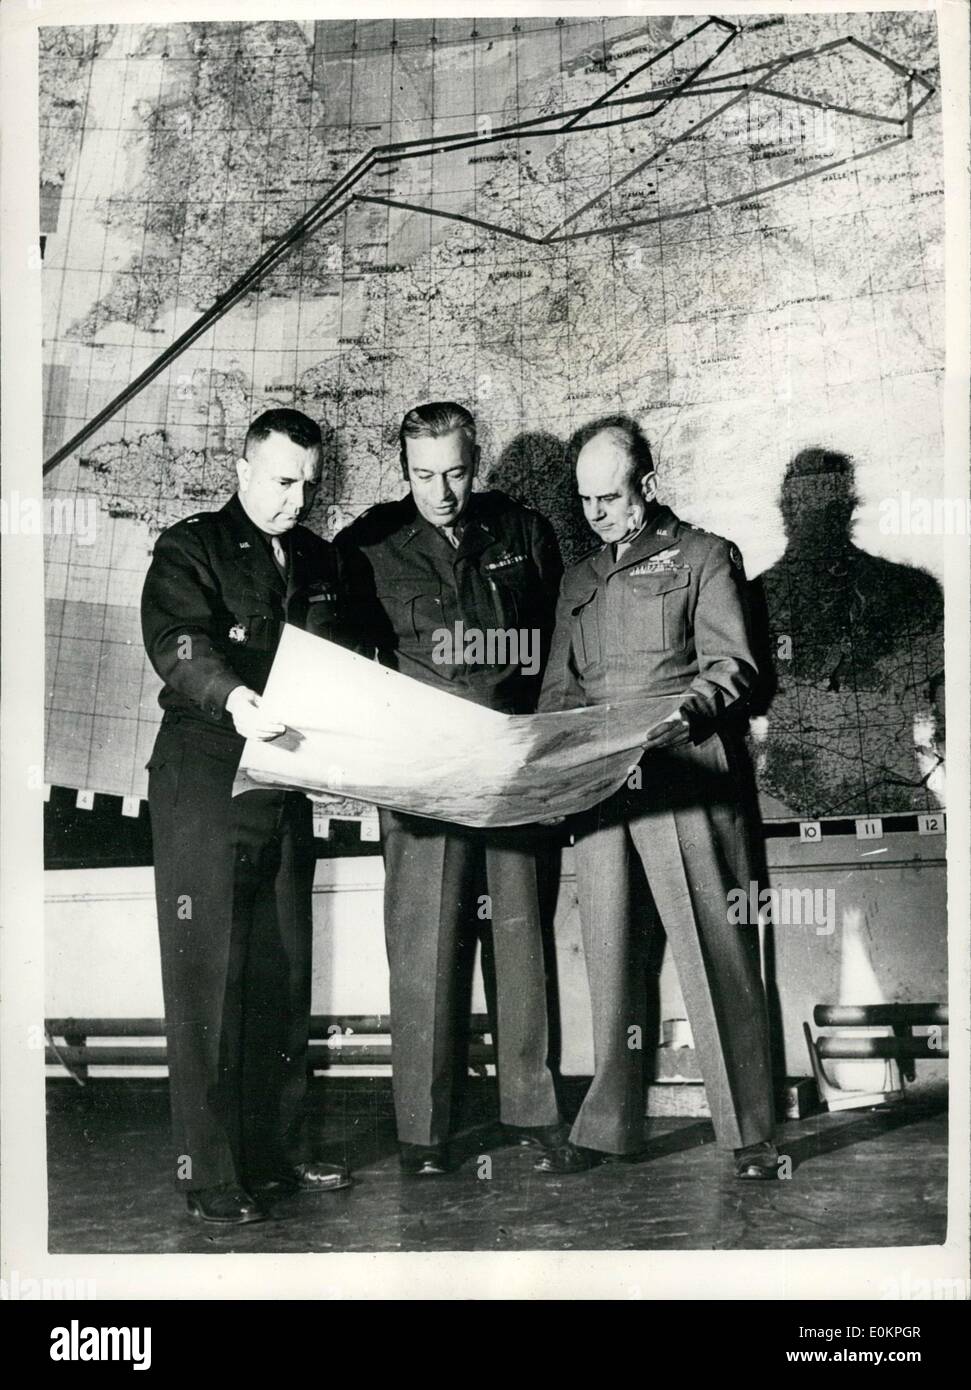 Apr. 04, 1945 - GENERALS PLAN AIR ATTACK. The commanding General of the U.S. 8th Air Force Lieutenant General JAMES H. DOOLITTLE Locks over weather map with two members of his staff. Standing in front of a route map of a Berlin mission. General Doolittle confers with Brigadier General Charles Y. BAWFILL, Director of Intelligence, 8th Air Force (left) and Major General Orvil A.Anderson, Deputy Commanding General for Operations, 8th Air Force (centre) Stock Photo